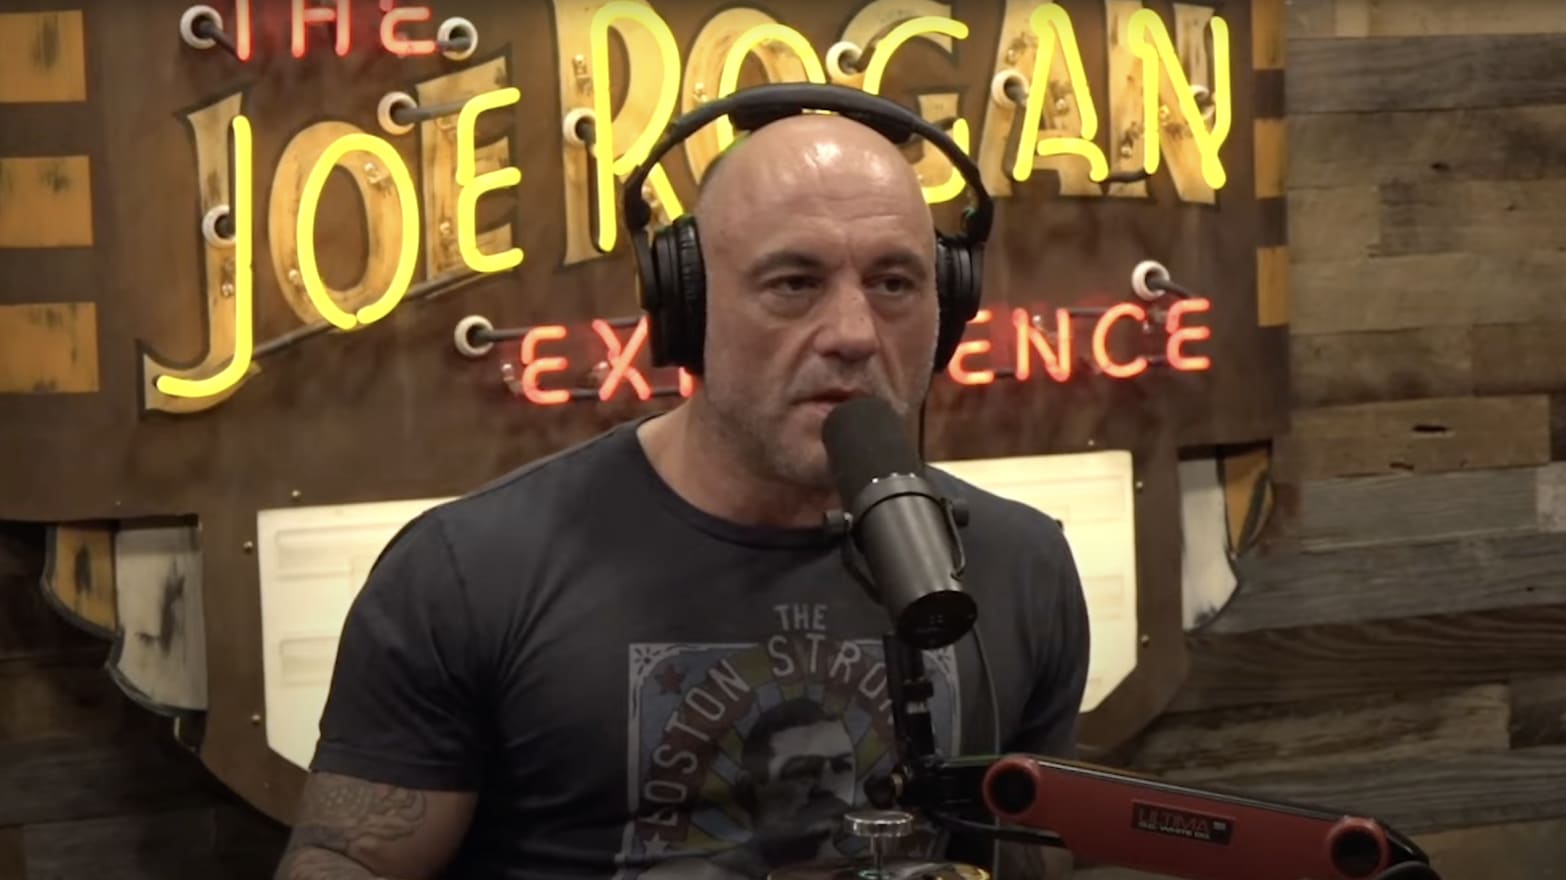 Joe Rogan suggested Arizona gubernatorial candidate Kari Lake may actually be correct about the wide-scale voter fraud.